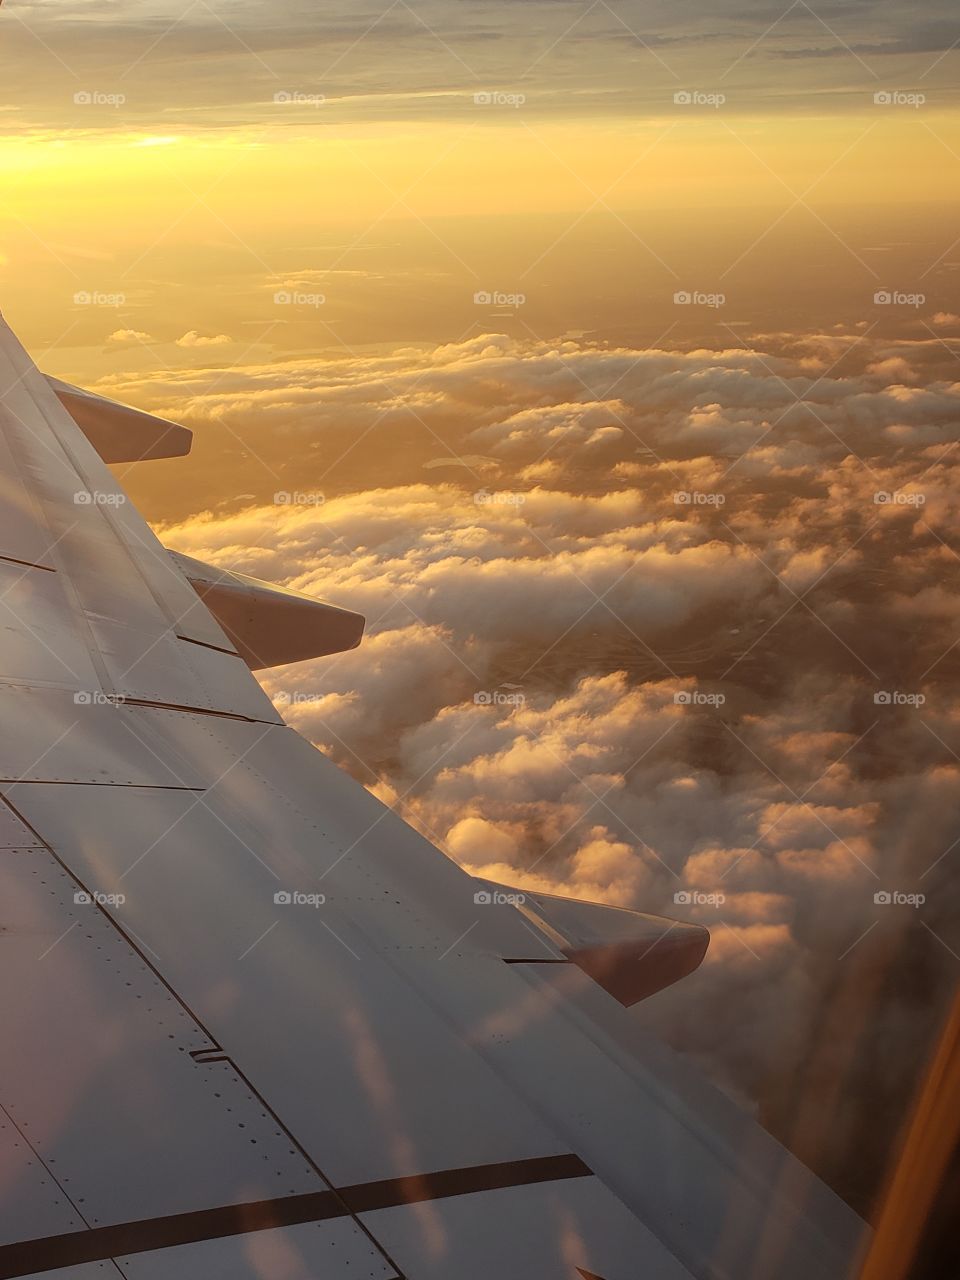 Sunset from 30,000 in the air. Airplane soars above clouds in an orange sunset.